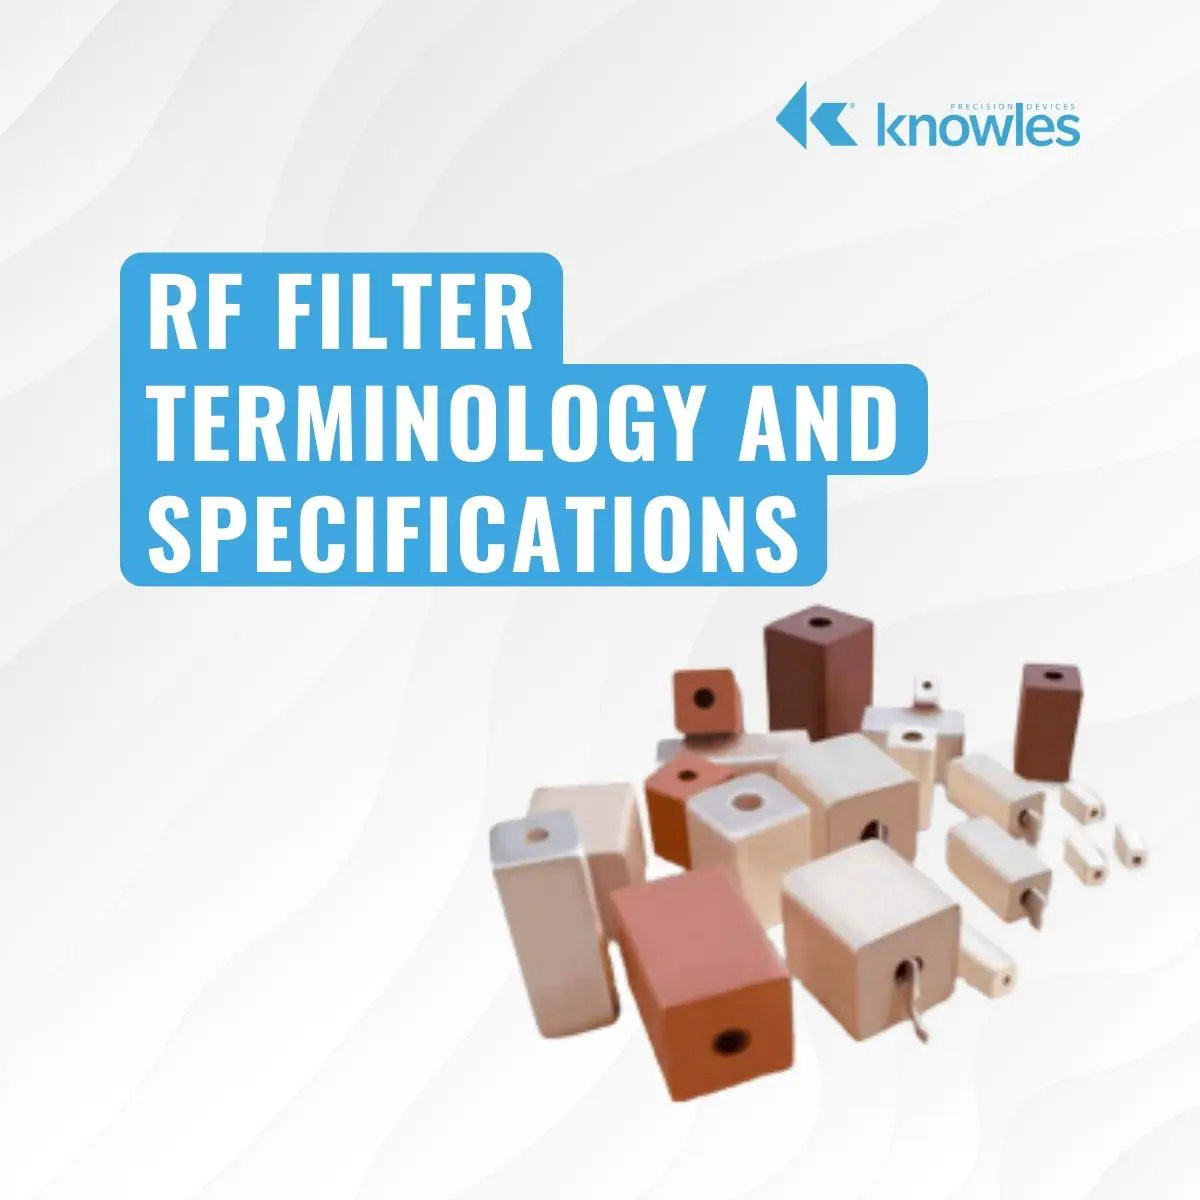 RF Filter Terminology and Specifications